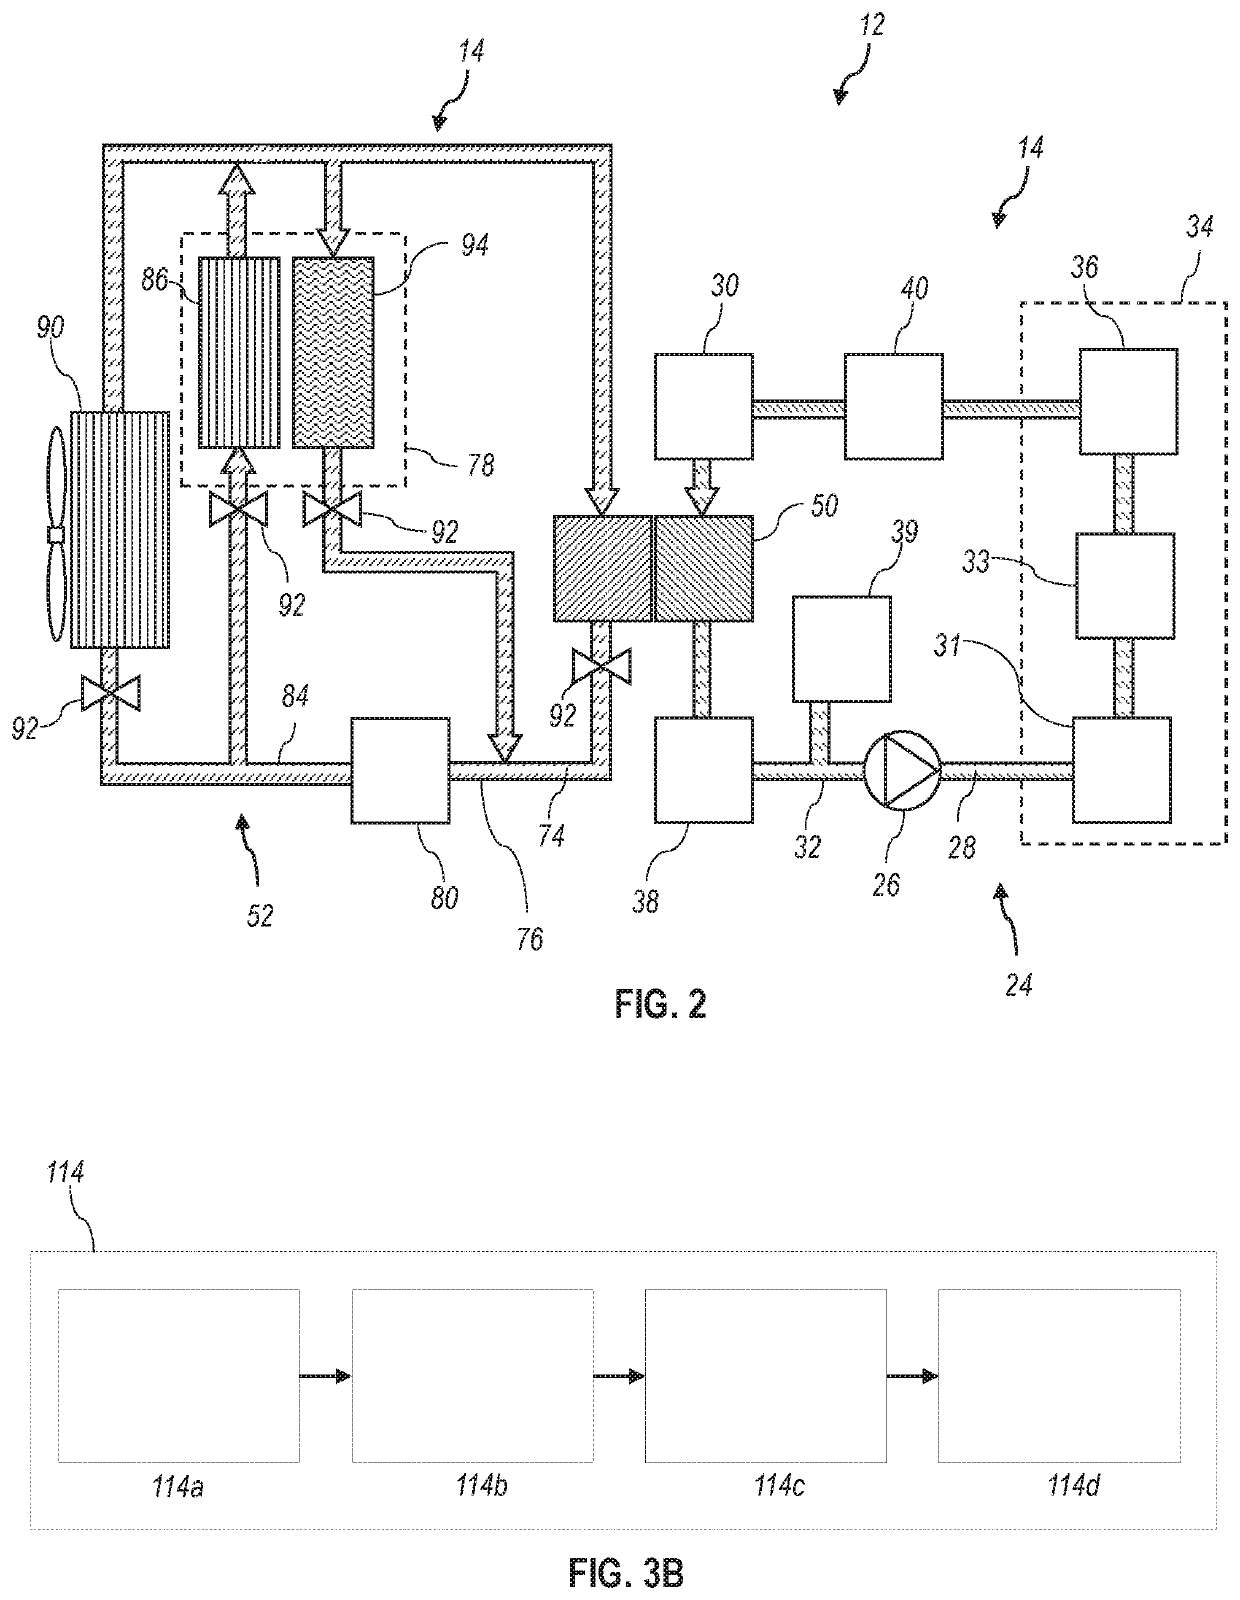 Thermal system control for a vehicle